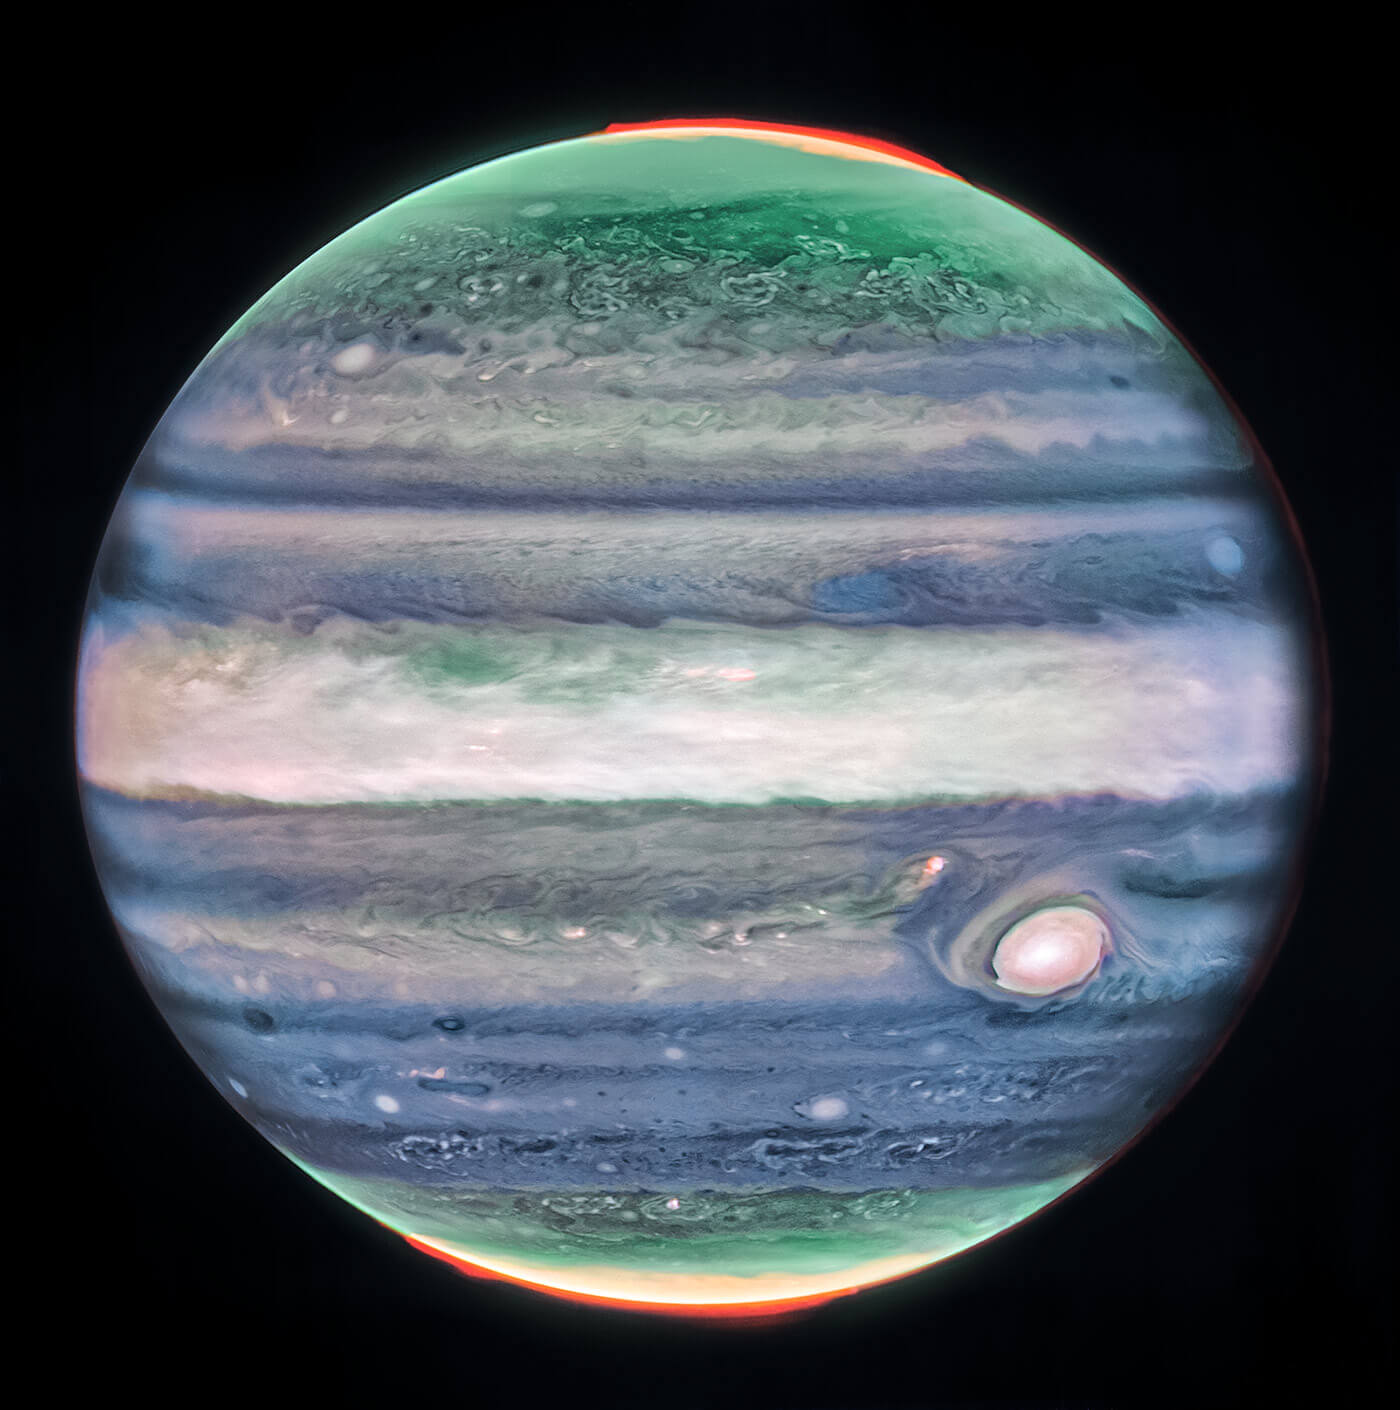 Jupiter, the largest planet in the Solar System